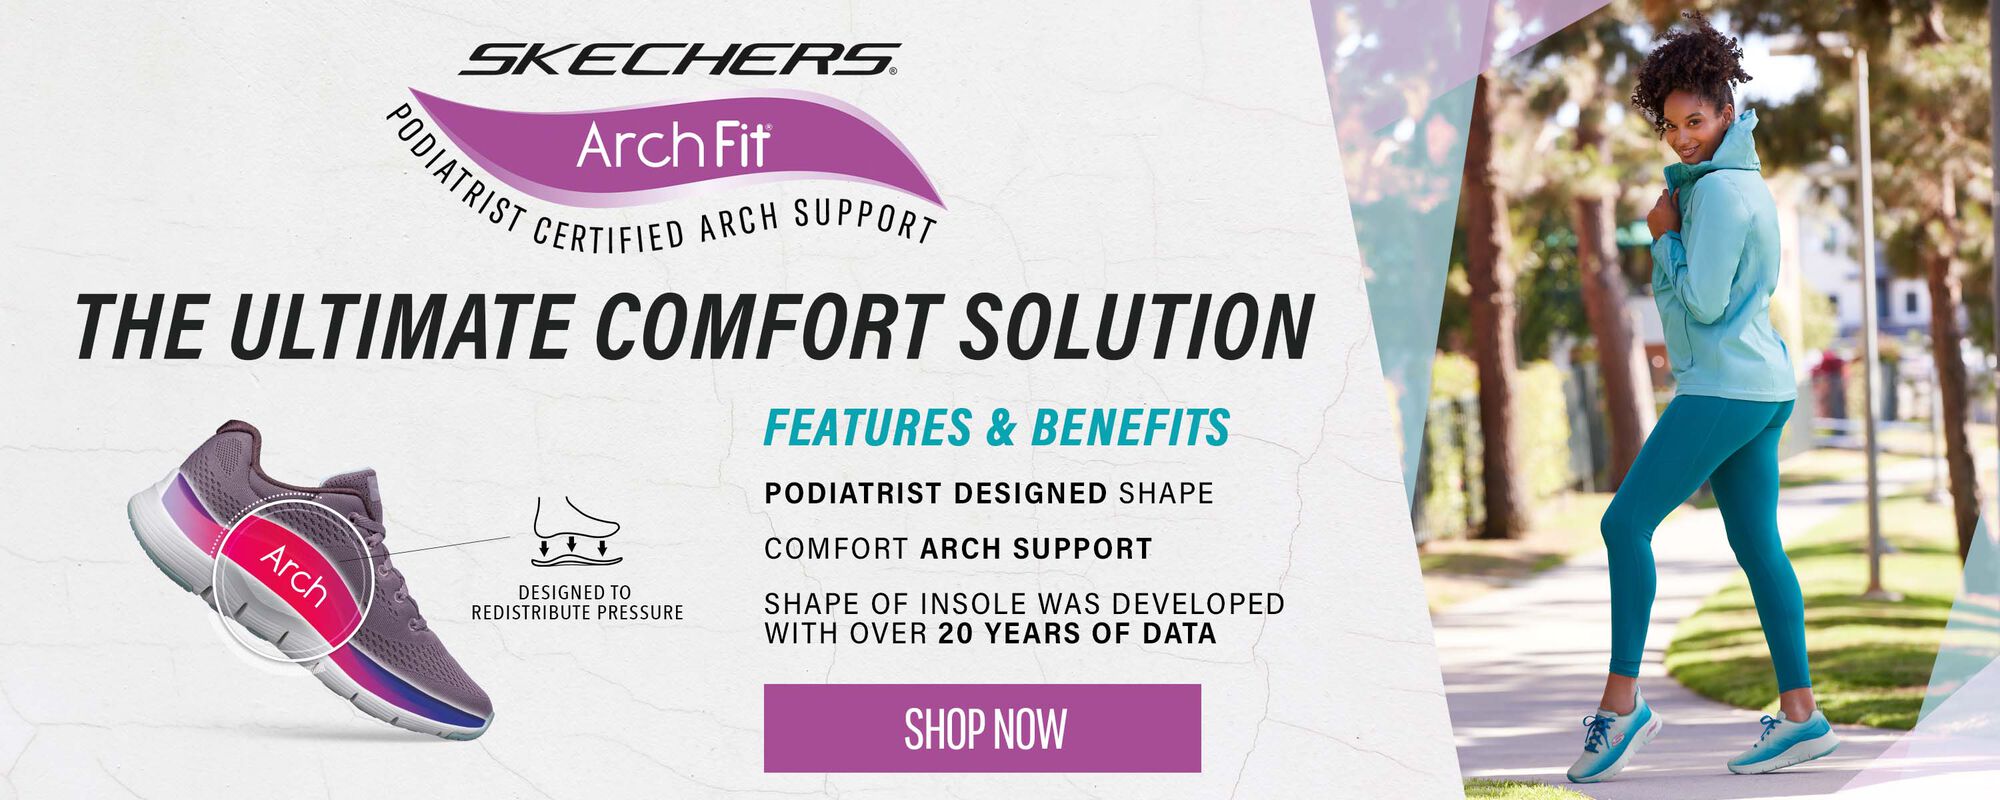 Women's Shoes, Clothing & Accessories | SKECHERS UK